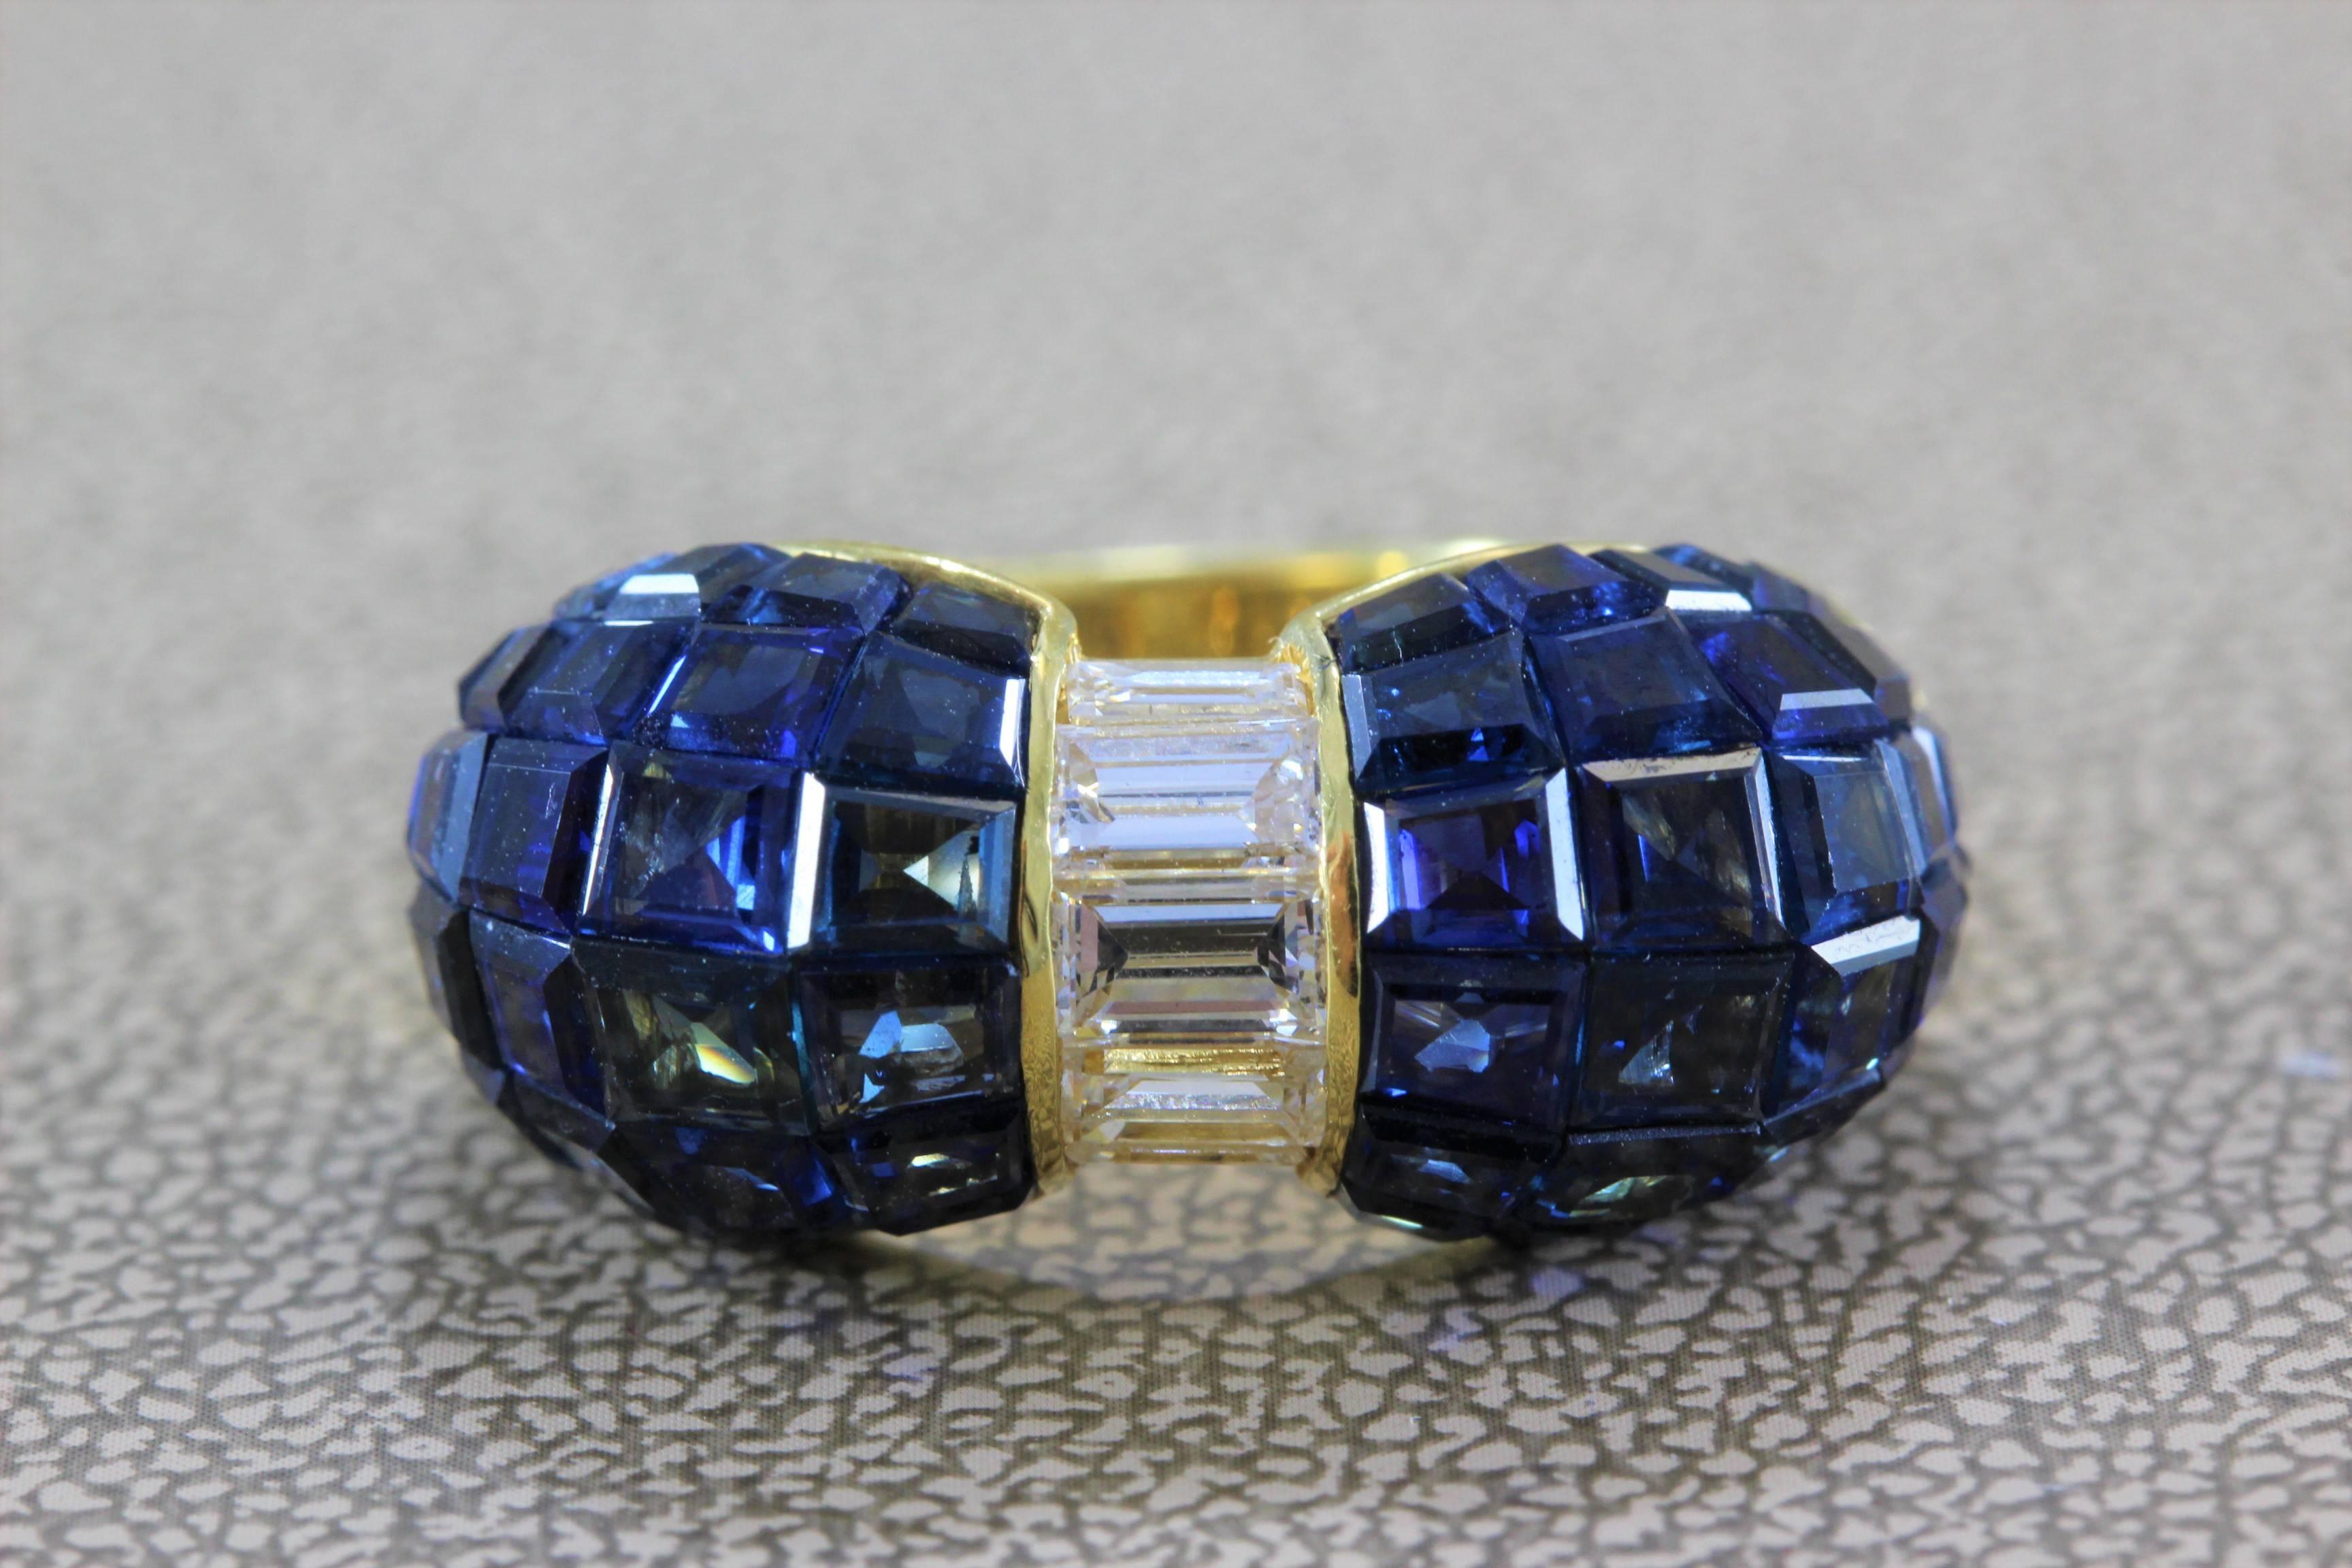 A beautifully crafted ring featuring 0.83 carats of VVS clarity baguette cut diamonds in between 7.30 carats of gem vivid blue sapphires, set in 18K yellow gold. Top quality gems in a beautiful setting. 

Size 6.5 (sizable) 
